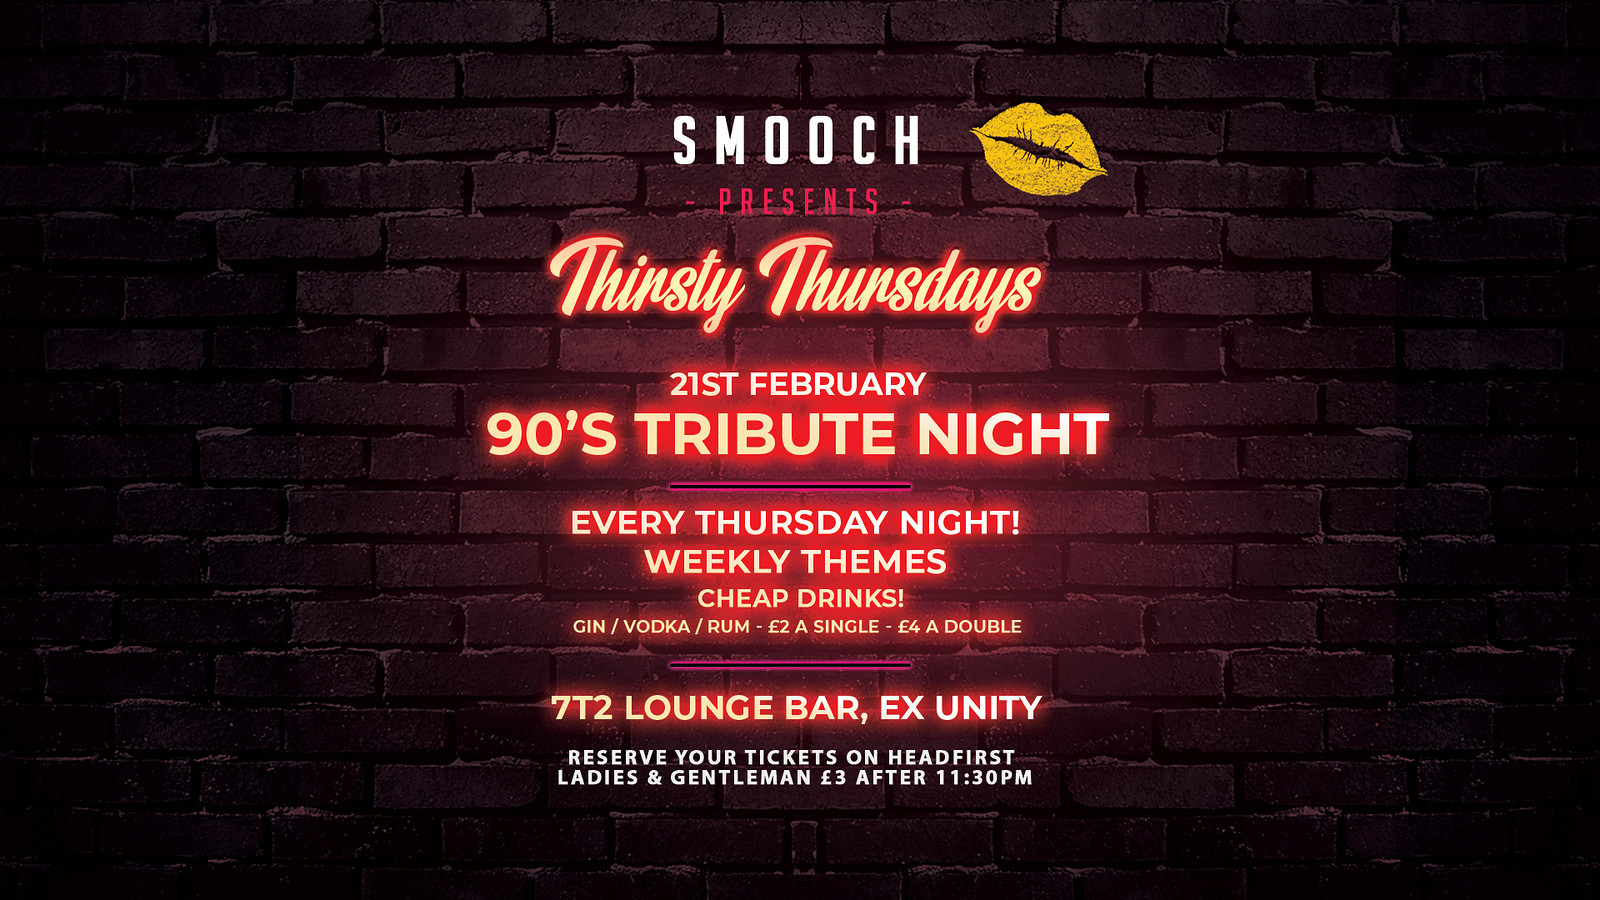 Throwback Thursday: It's the 90s baby at 7T2 Lounge Bar